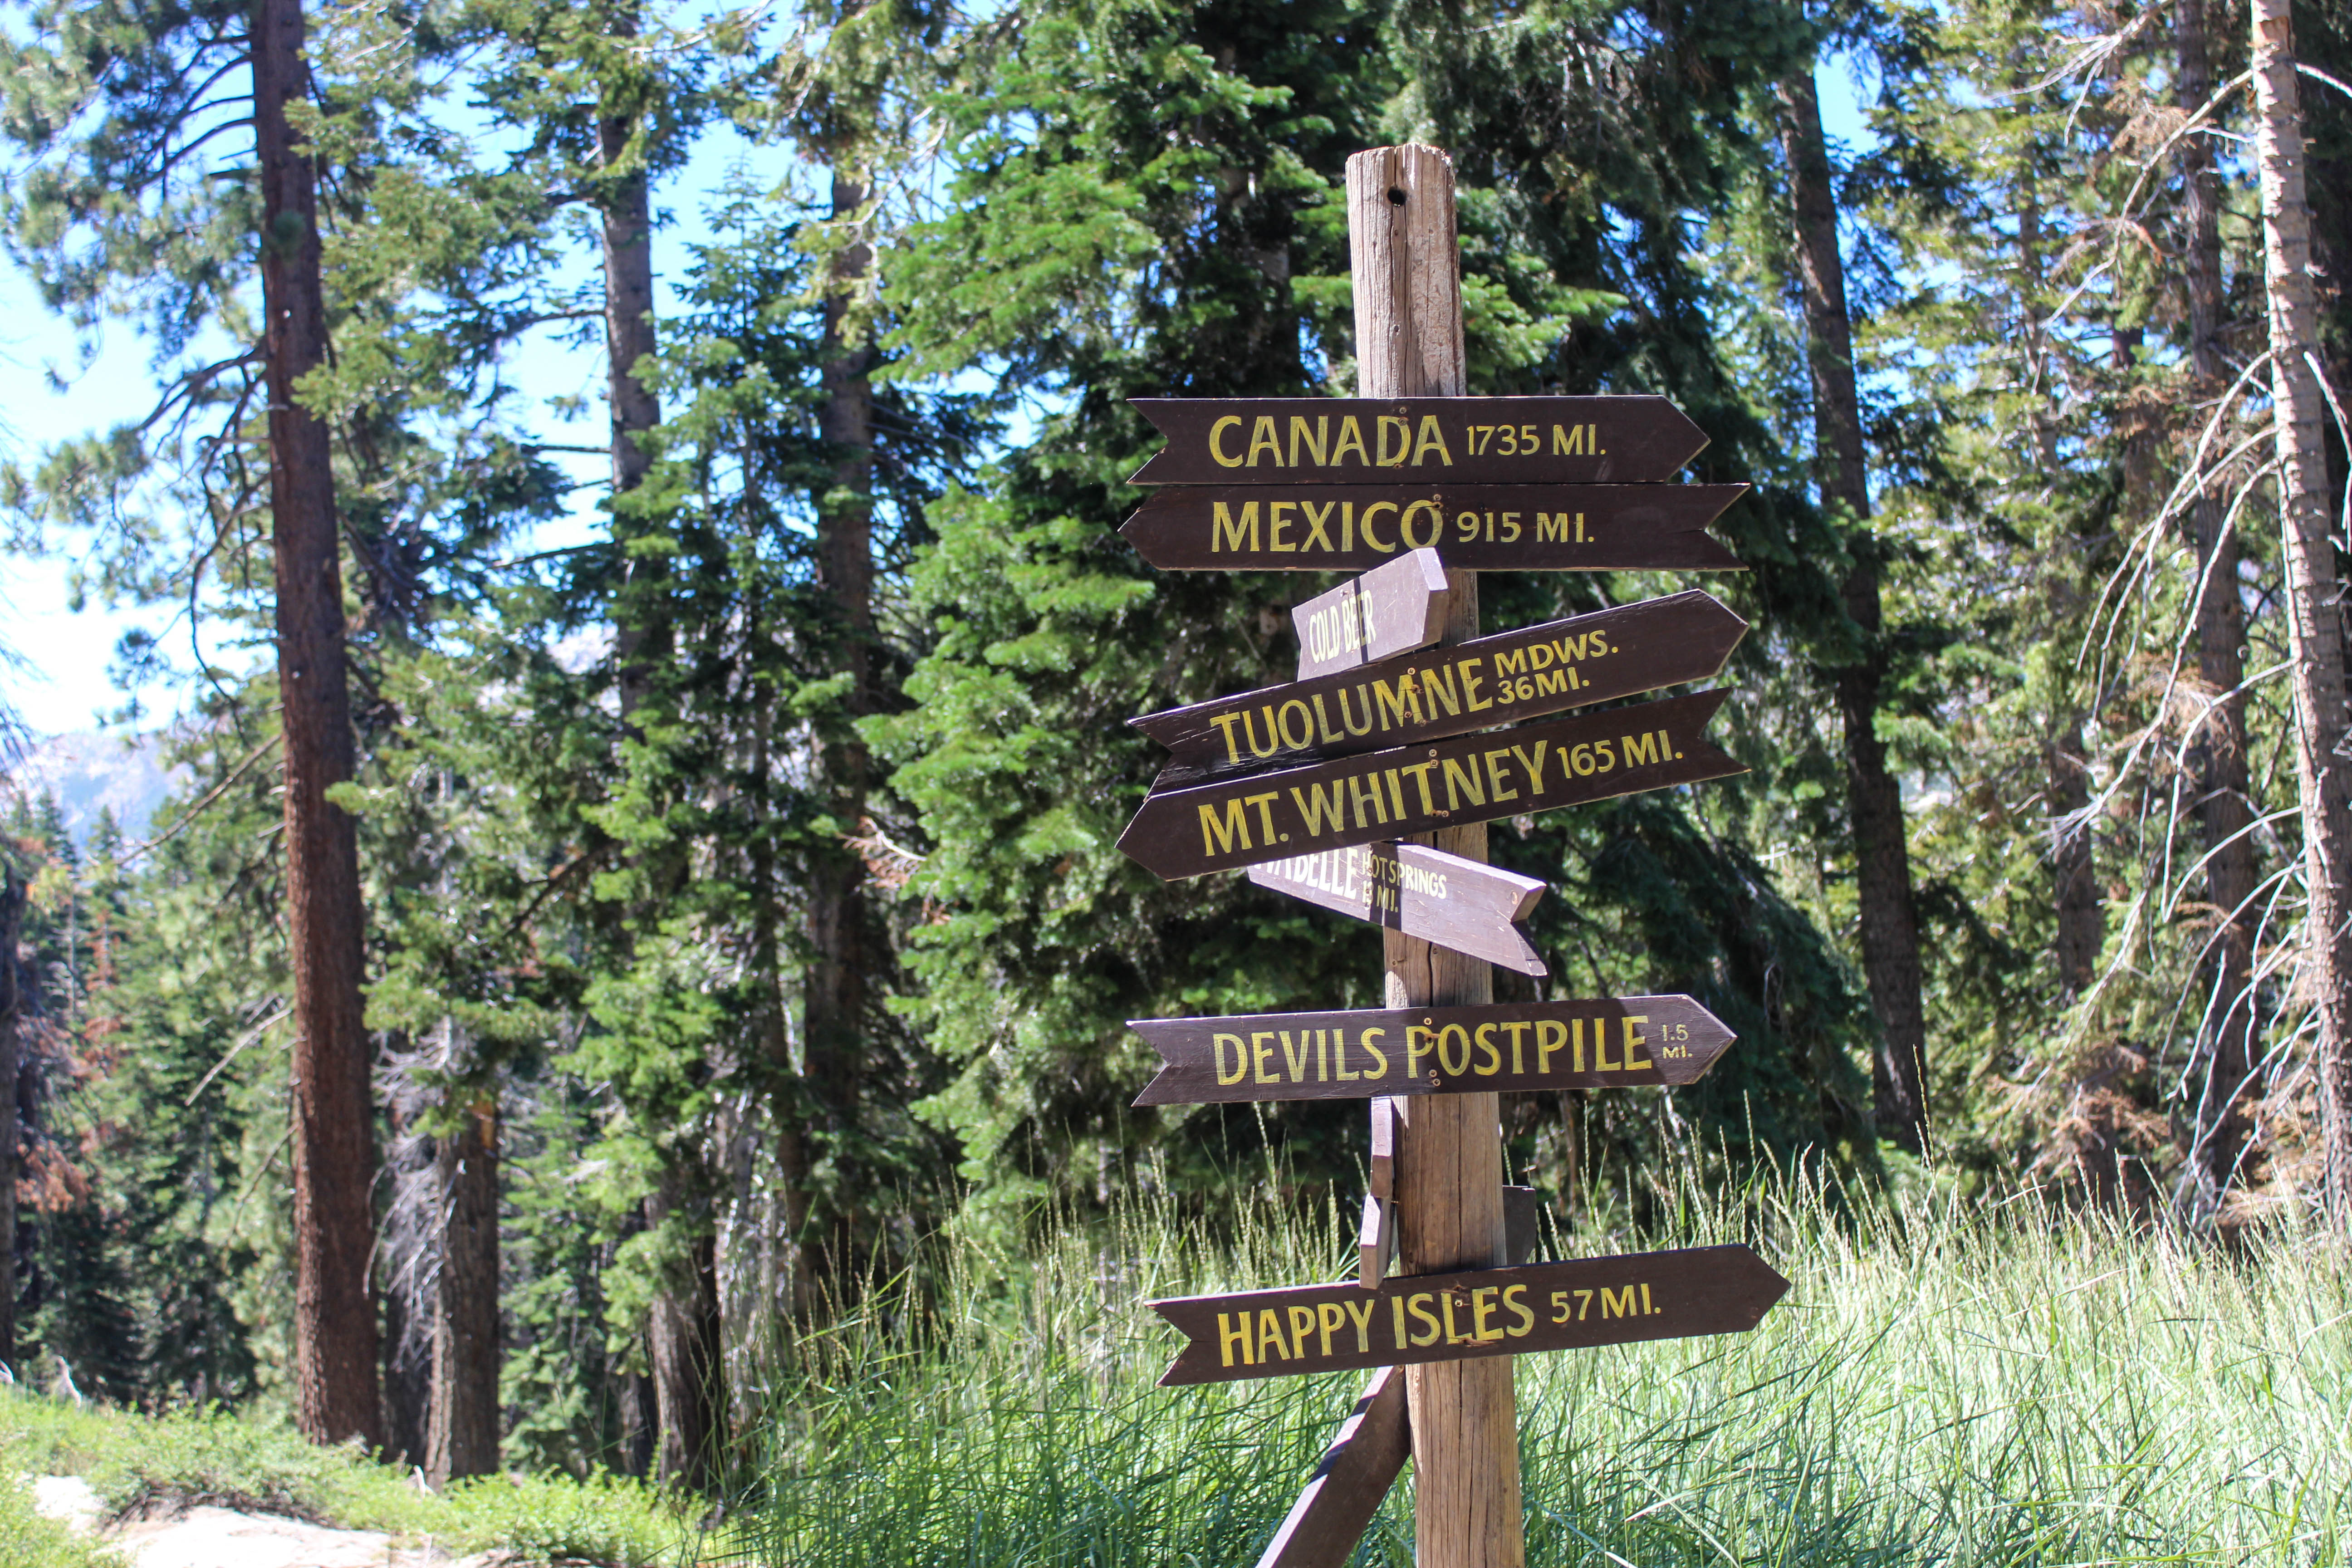 A trail junction sign with arrows pointing various ways. E.g. to Happy Isles Trailhead, Mt. Whitney, and Cold Beer.